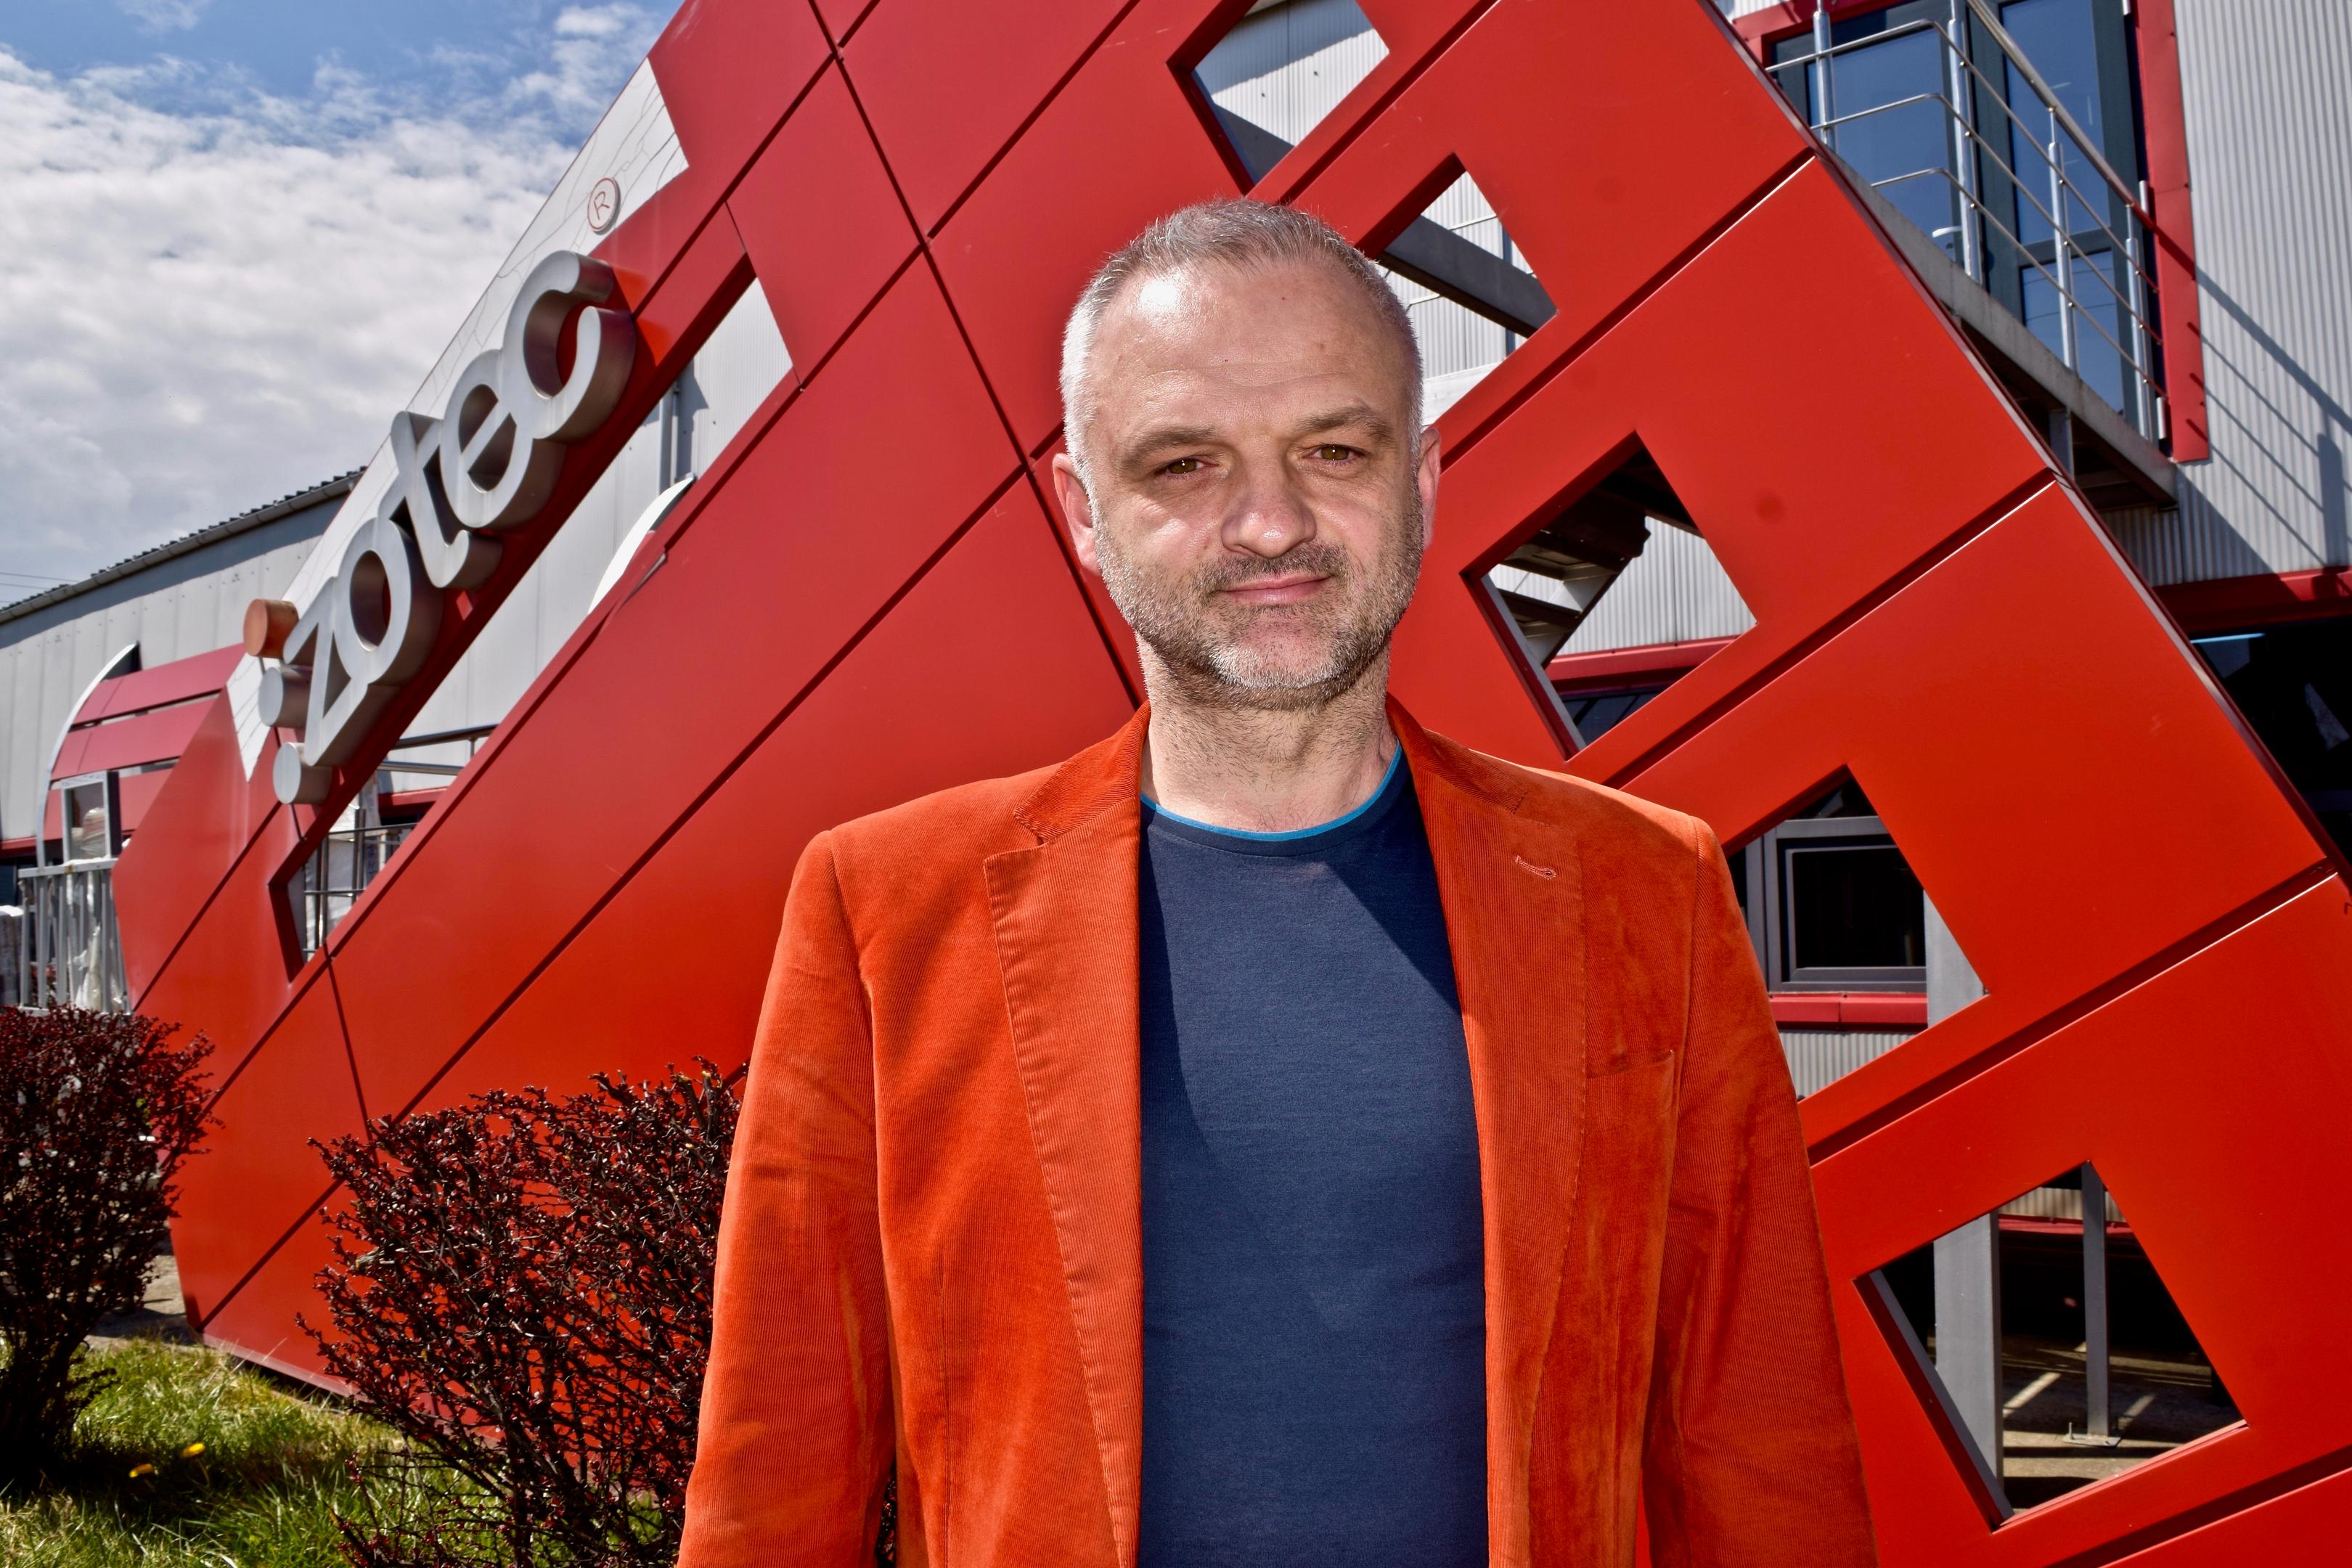 A picture of the CEO in red, in front of the red building Izotec